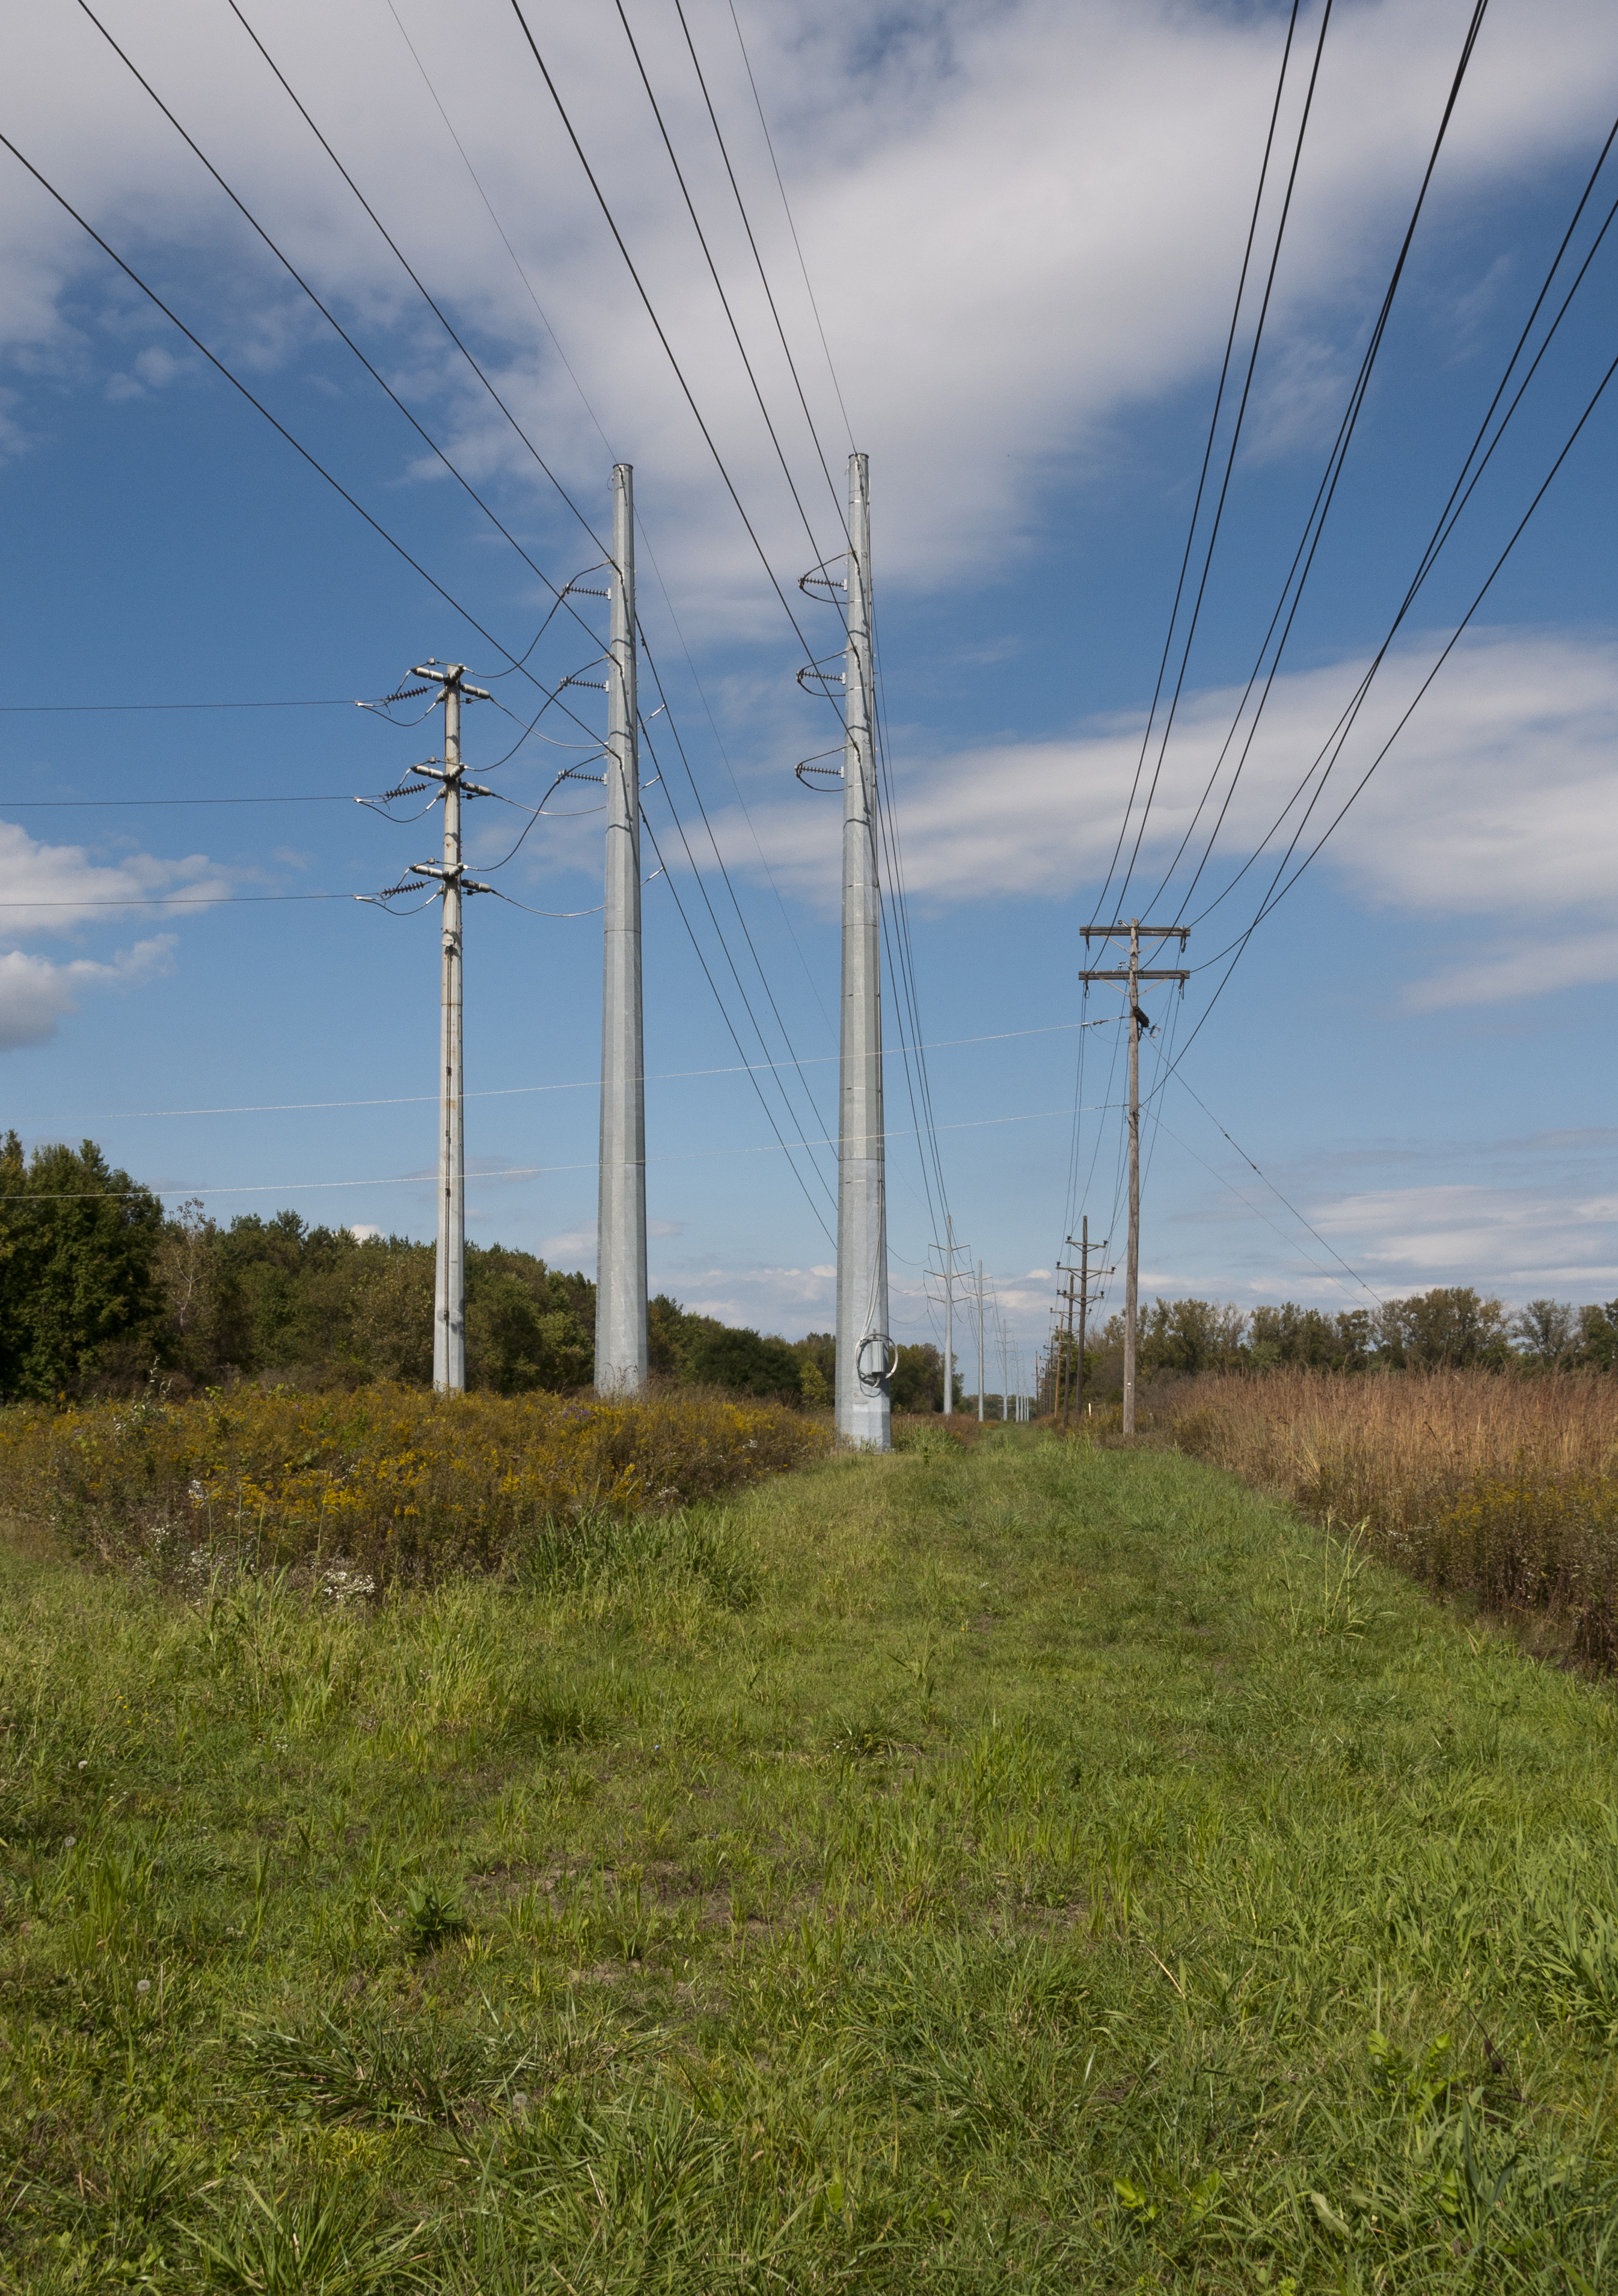 New High Transmission Lines Cut through the Meadow 1